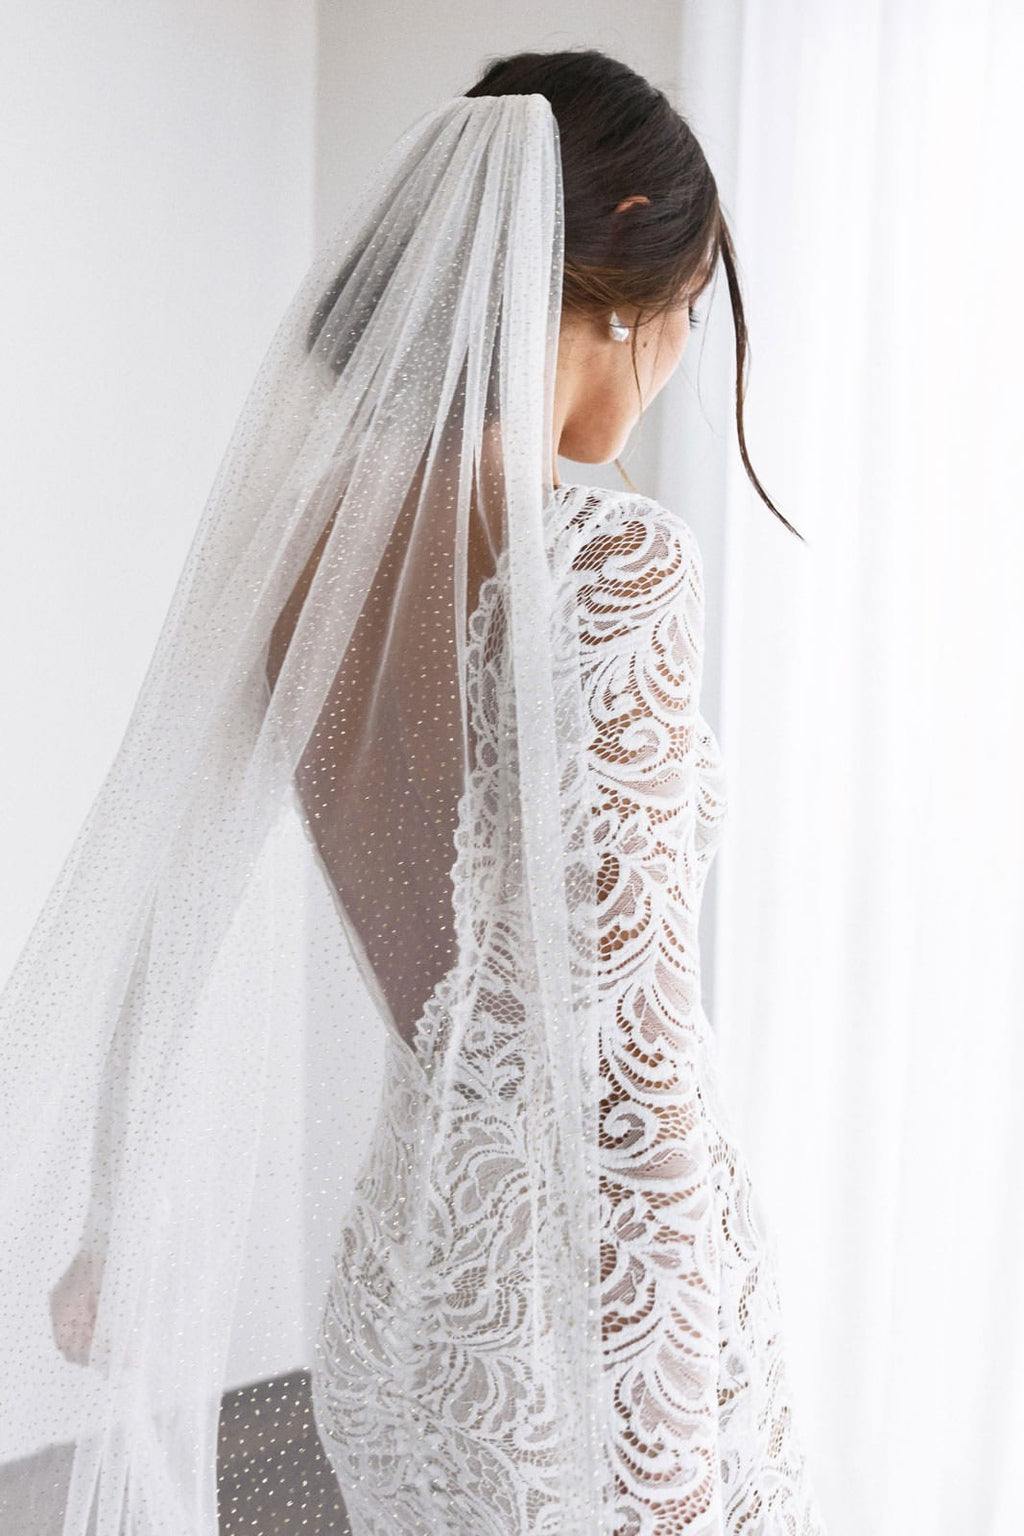 Lace cathedral veil - Bridal veils jewelry - Hello Lovers Australia  Melbourne